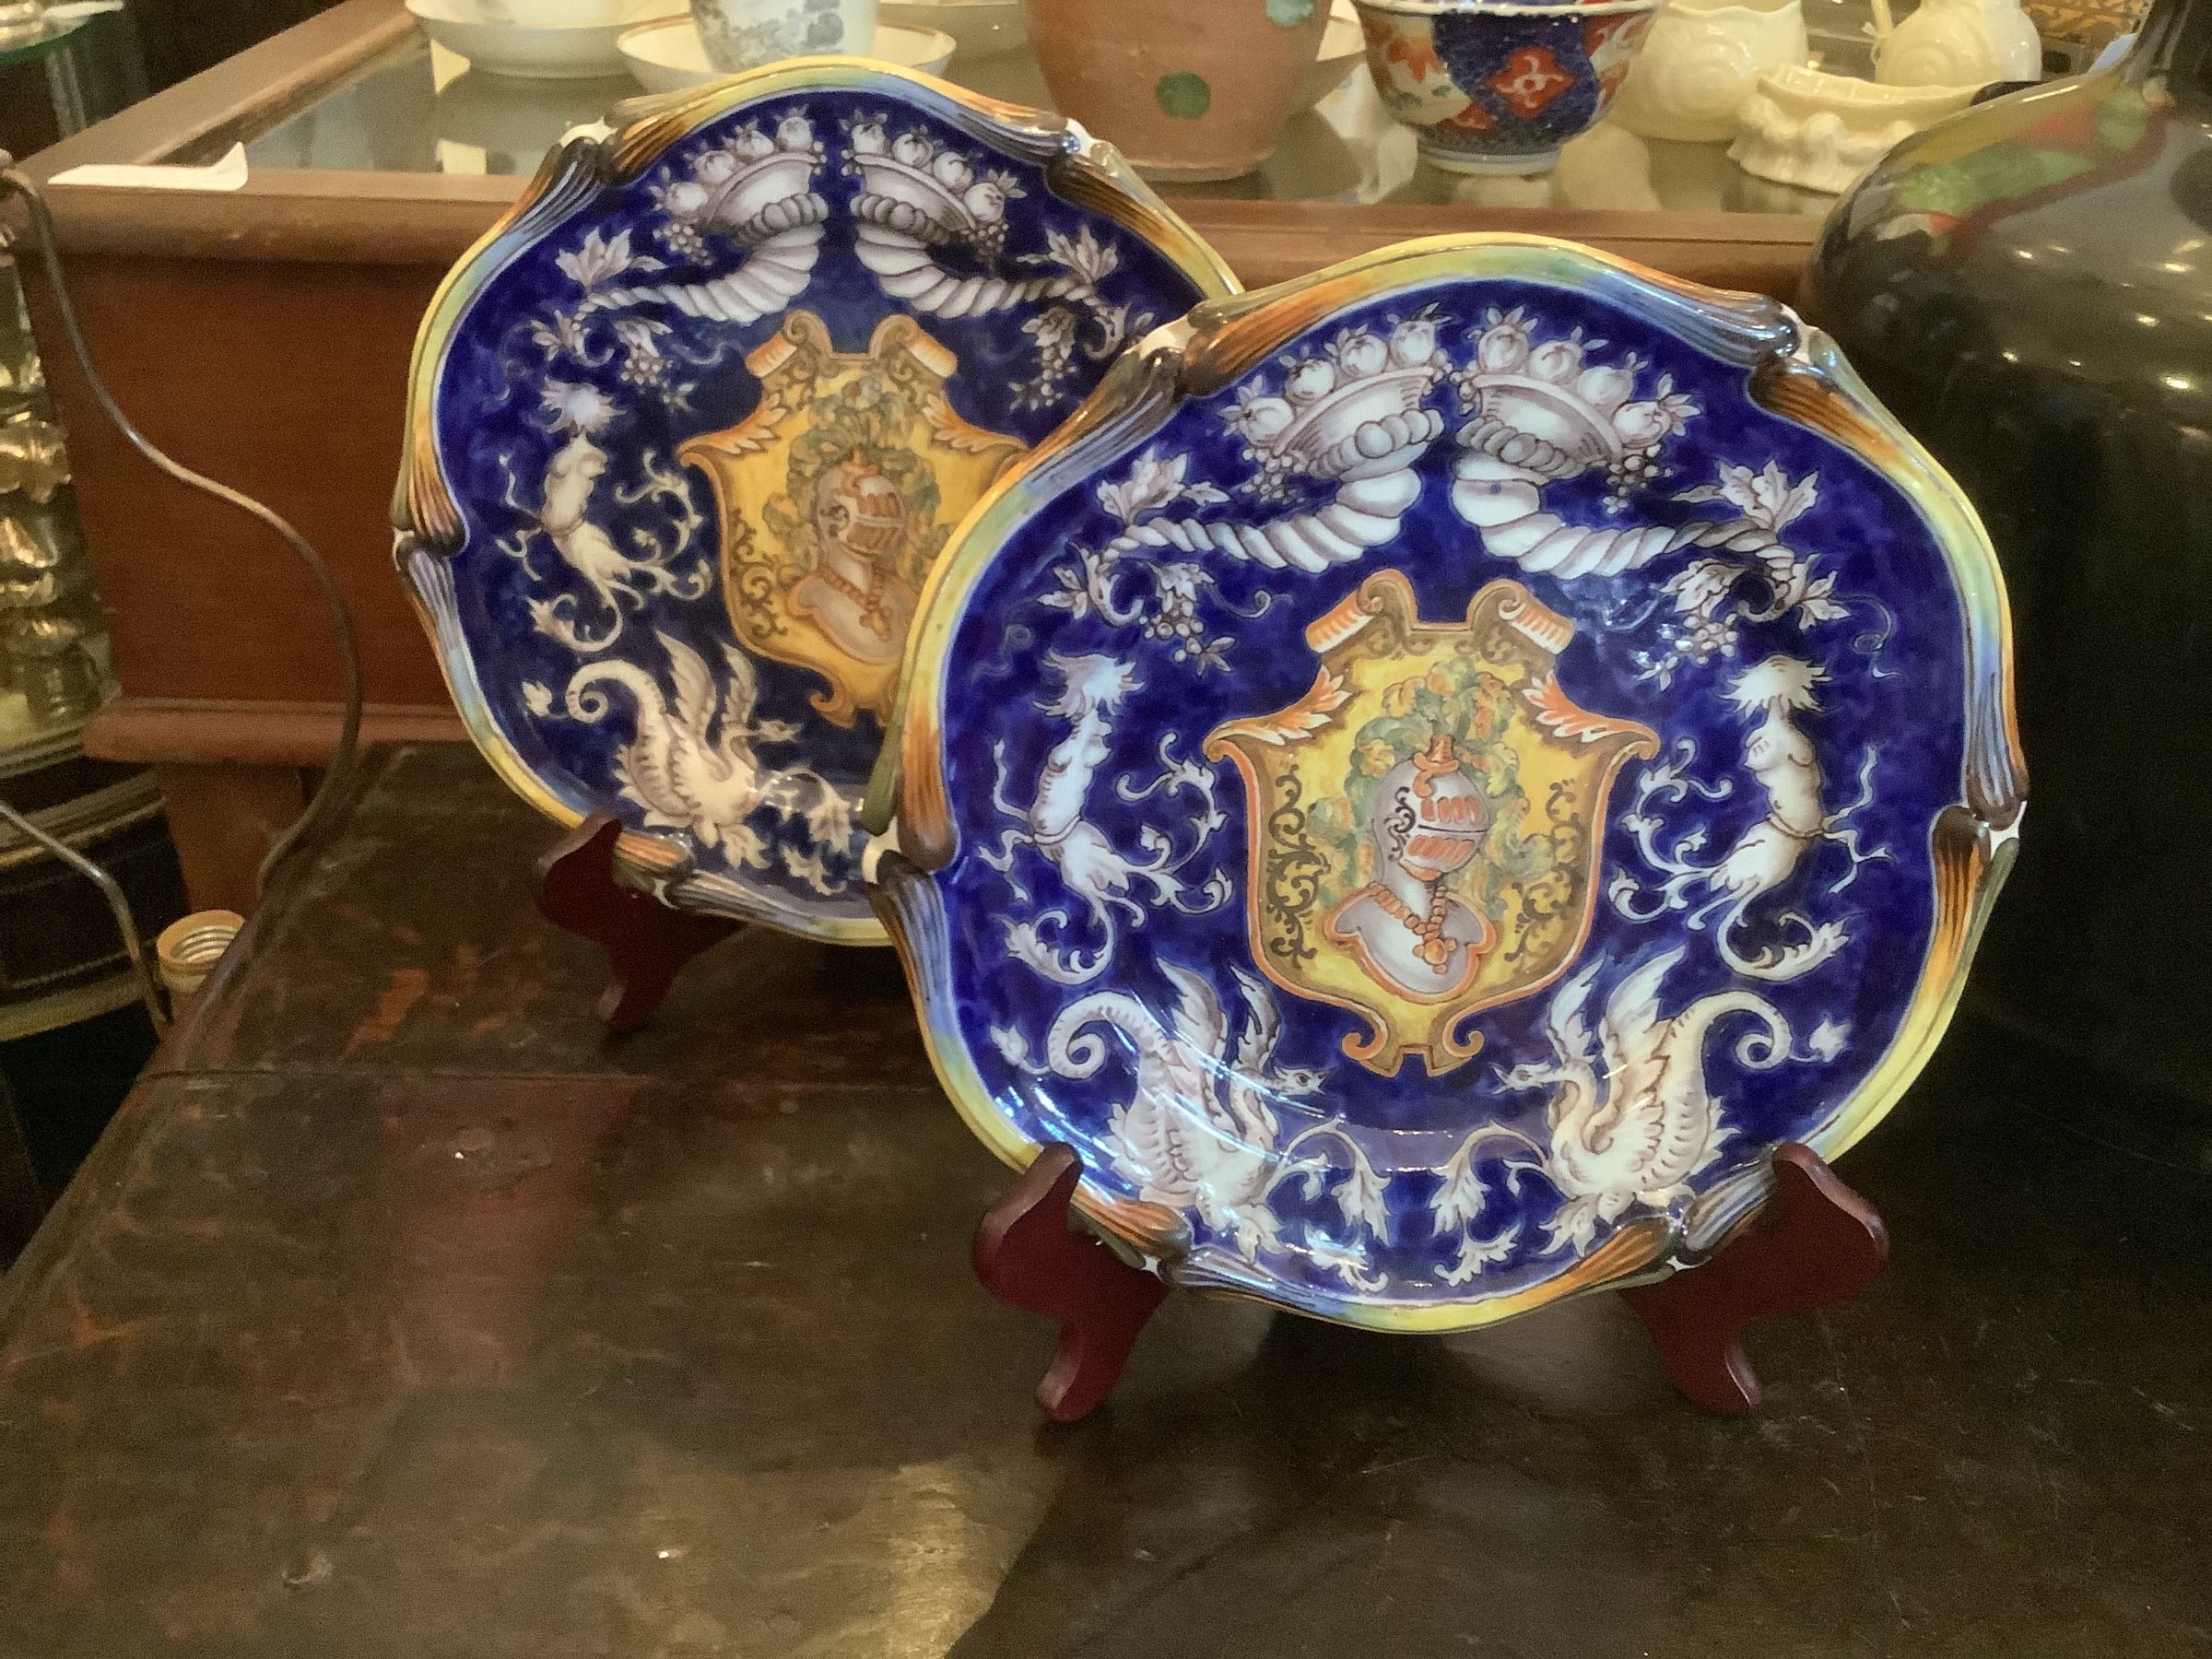 18th Century French Majolica “St. Clément” Pair Porcelain Plates